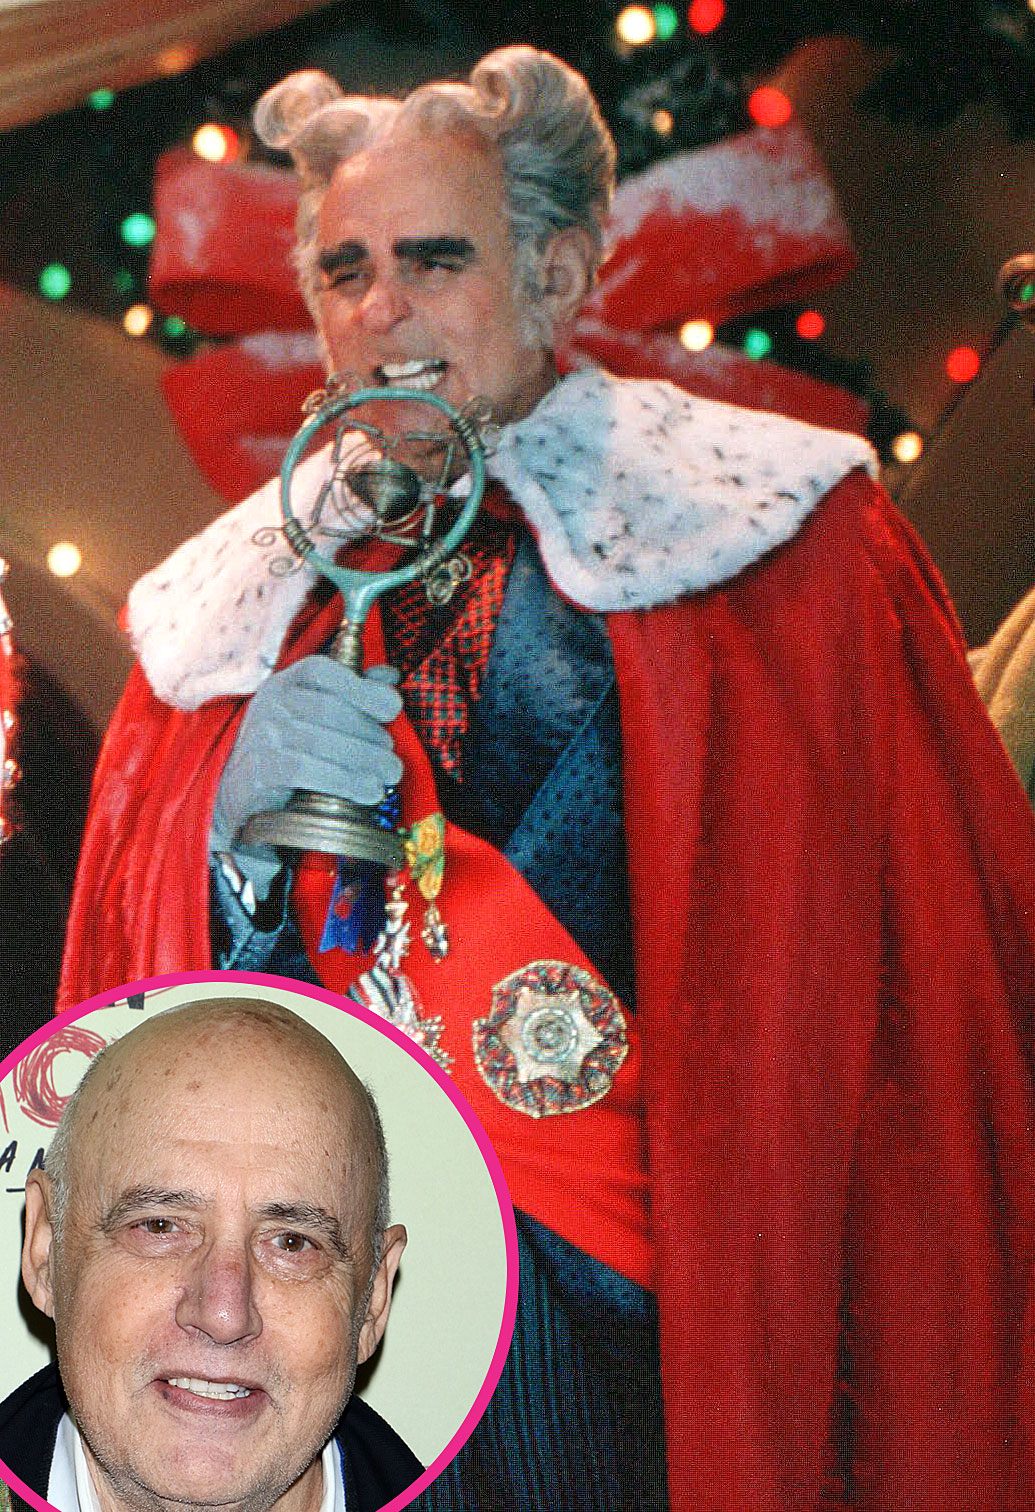 https://www.usmagazine.com/wp-content/uploads/2020/11/Celebrities-You-Forgot-Starred-How-Grinch-Stole-Christmas-005.jpg?quality=40&strip=all